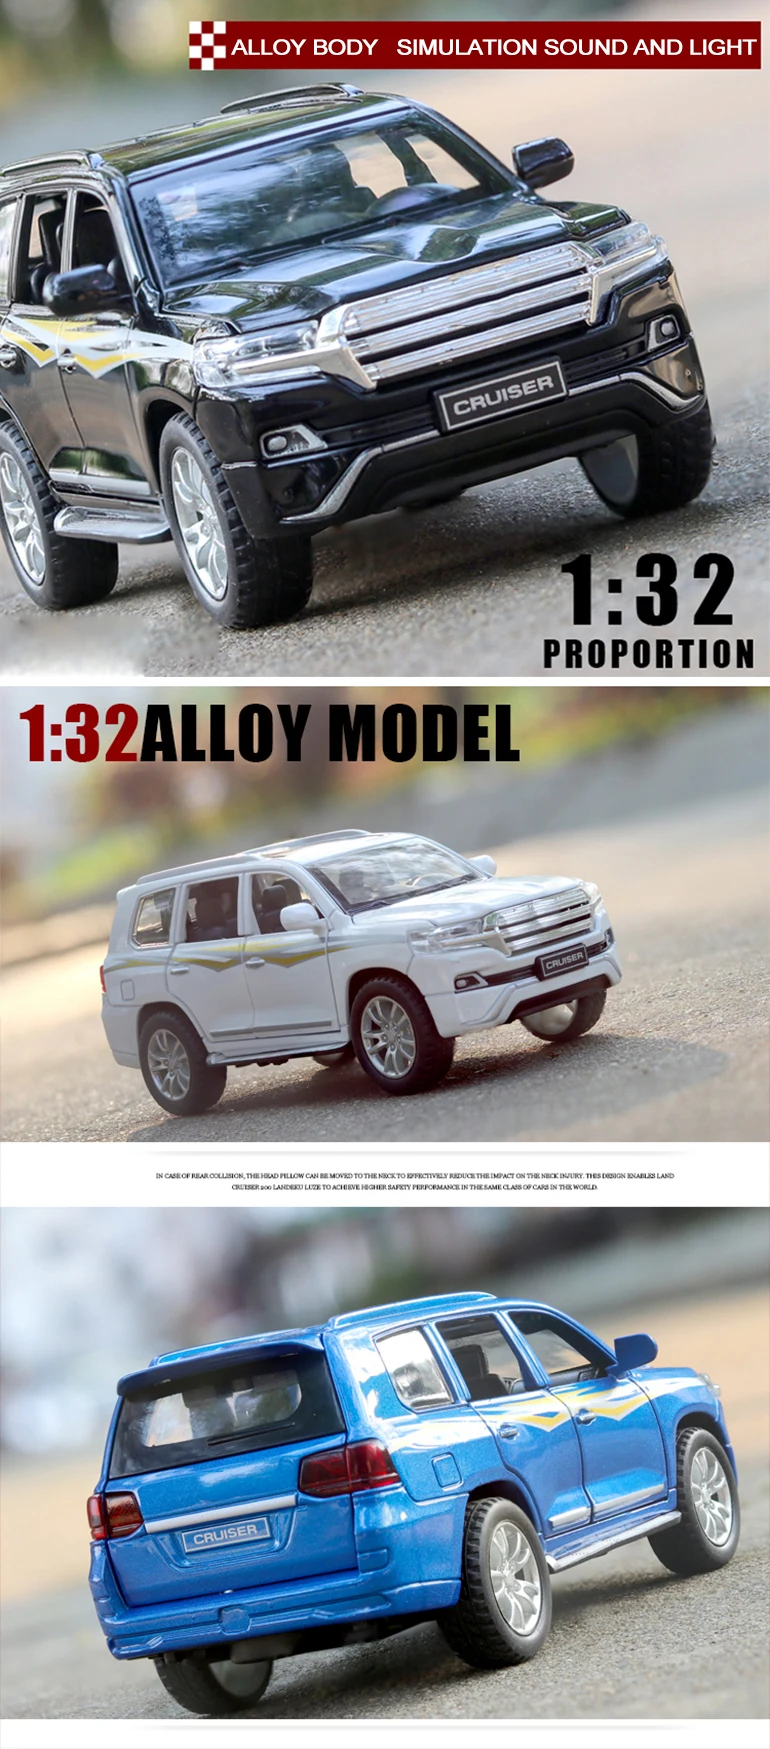 6 opening door pull back simulation diecast metal 1:32 kids alloy die cast model toy car toys with sound and light